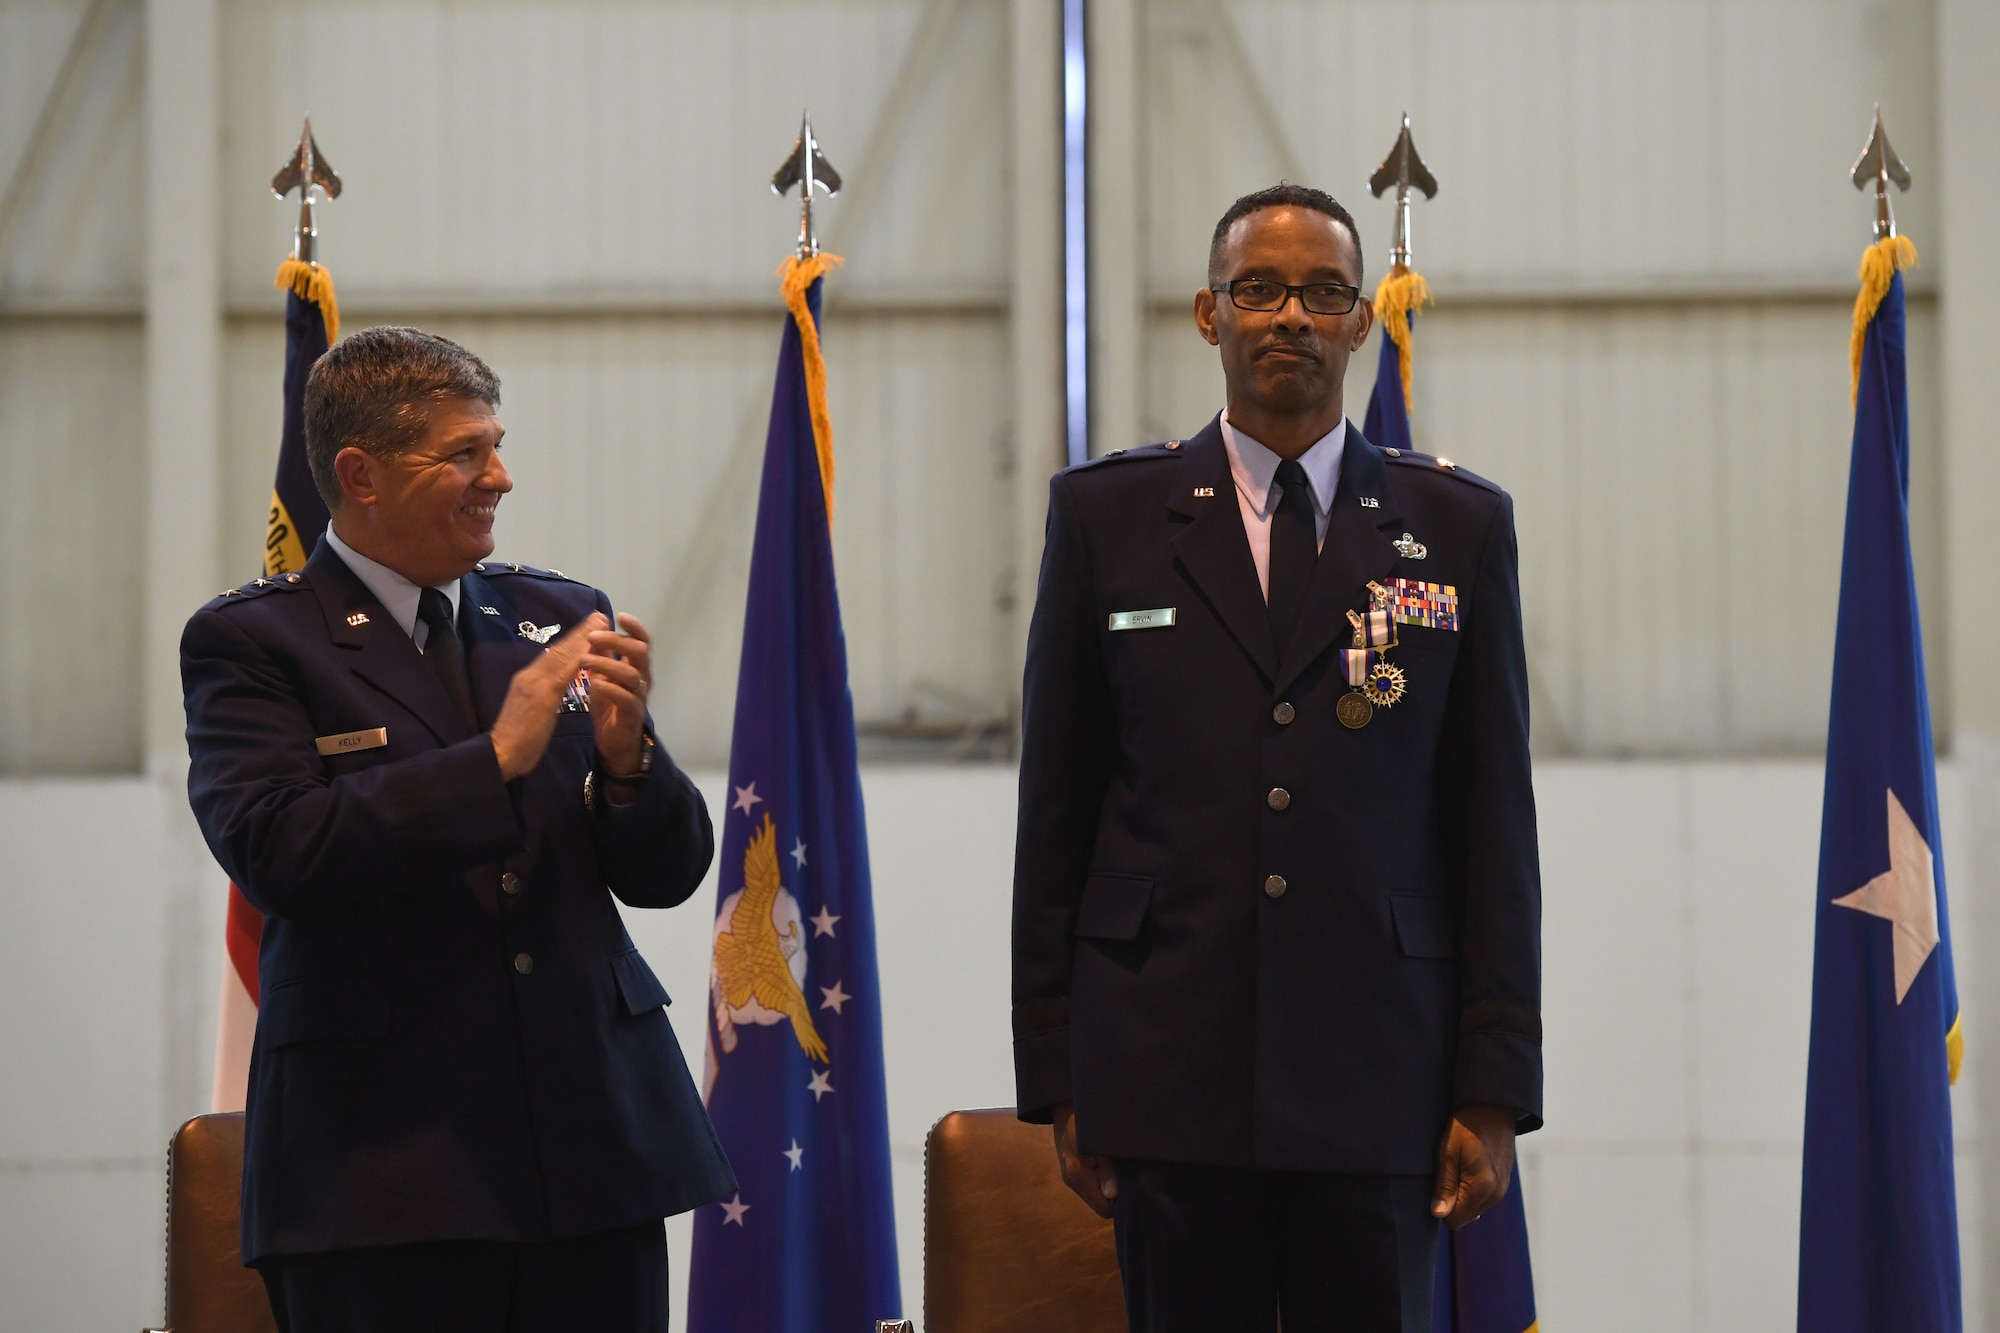 U.S. Air Force Maj. Gen., Retired, Todd Kelly applauds Brig. Gen. Clarence Ervin during his retirement ceremony at the North Carolina Air National Guard Base (NCANG), Charlotte Douglas International Airport, Feb. 09, 2019. Family, friends and guard members gathered to celebrate the retirement of Gen. Ervin, Chief of Staff for the NCANG, after serving in the military for 37 years.